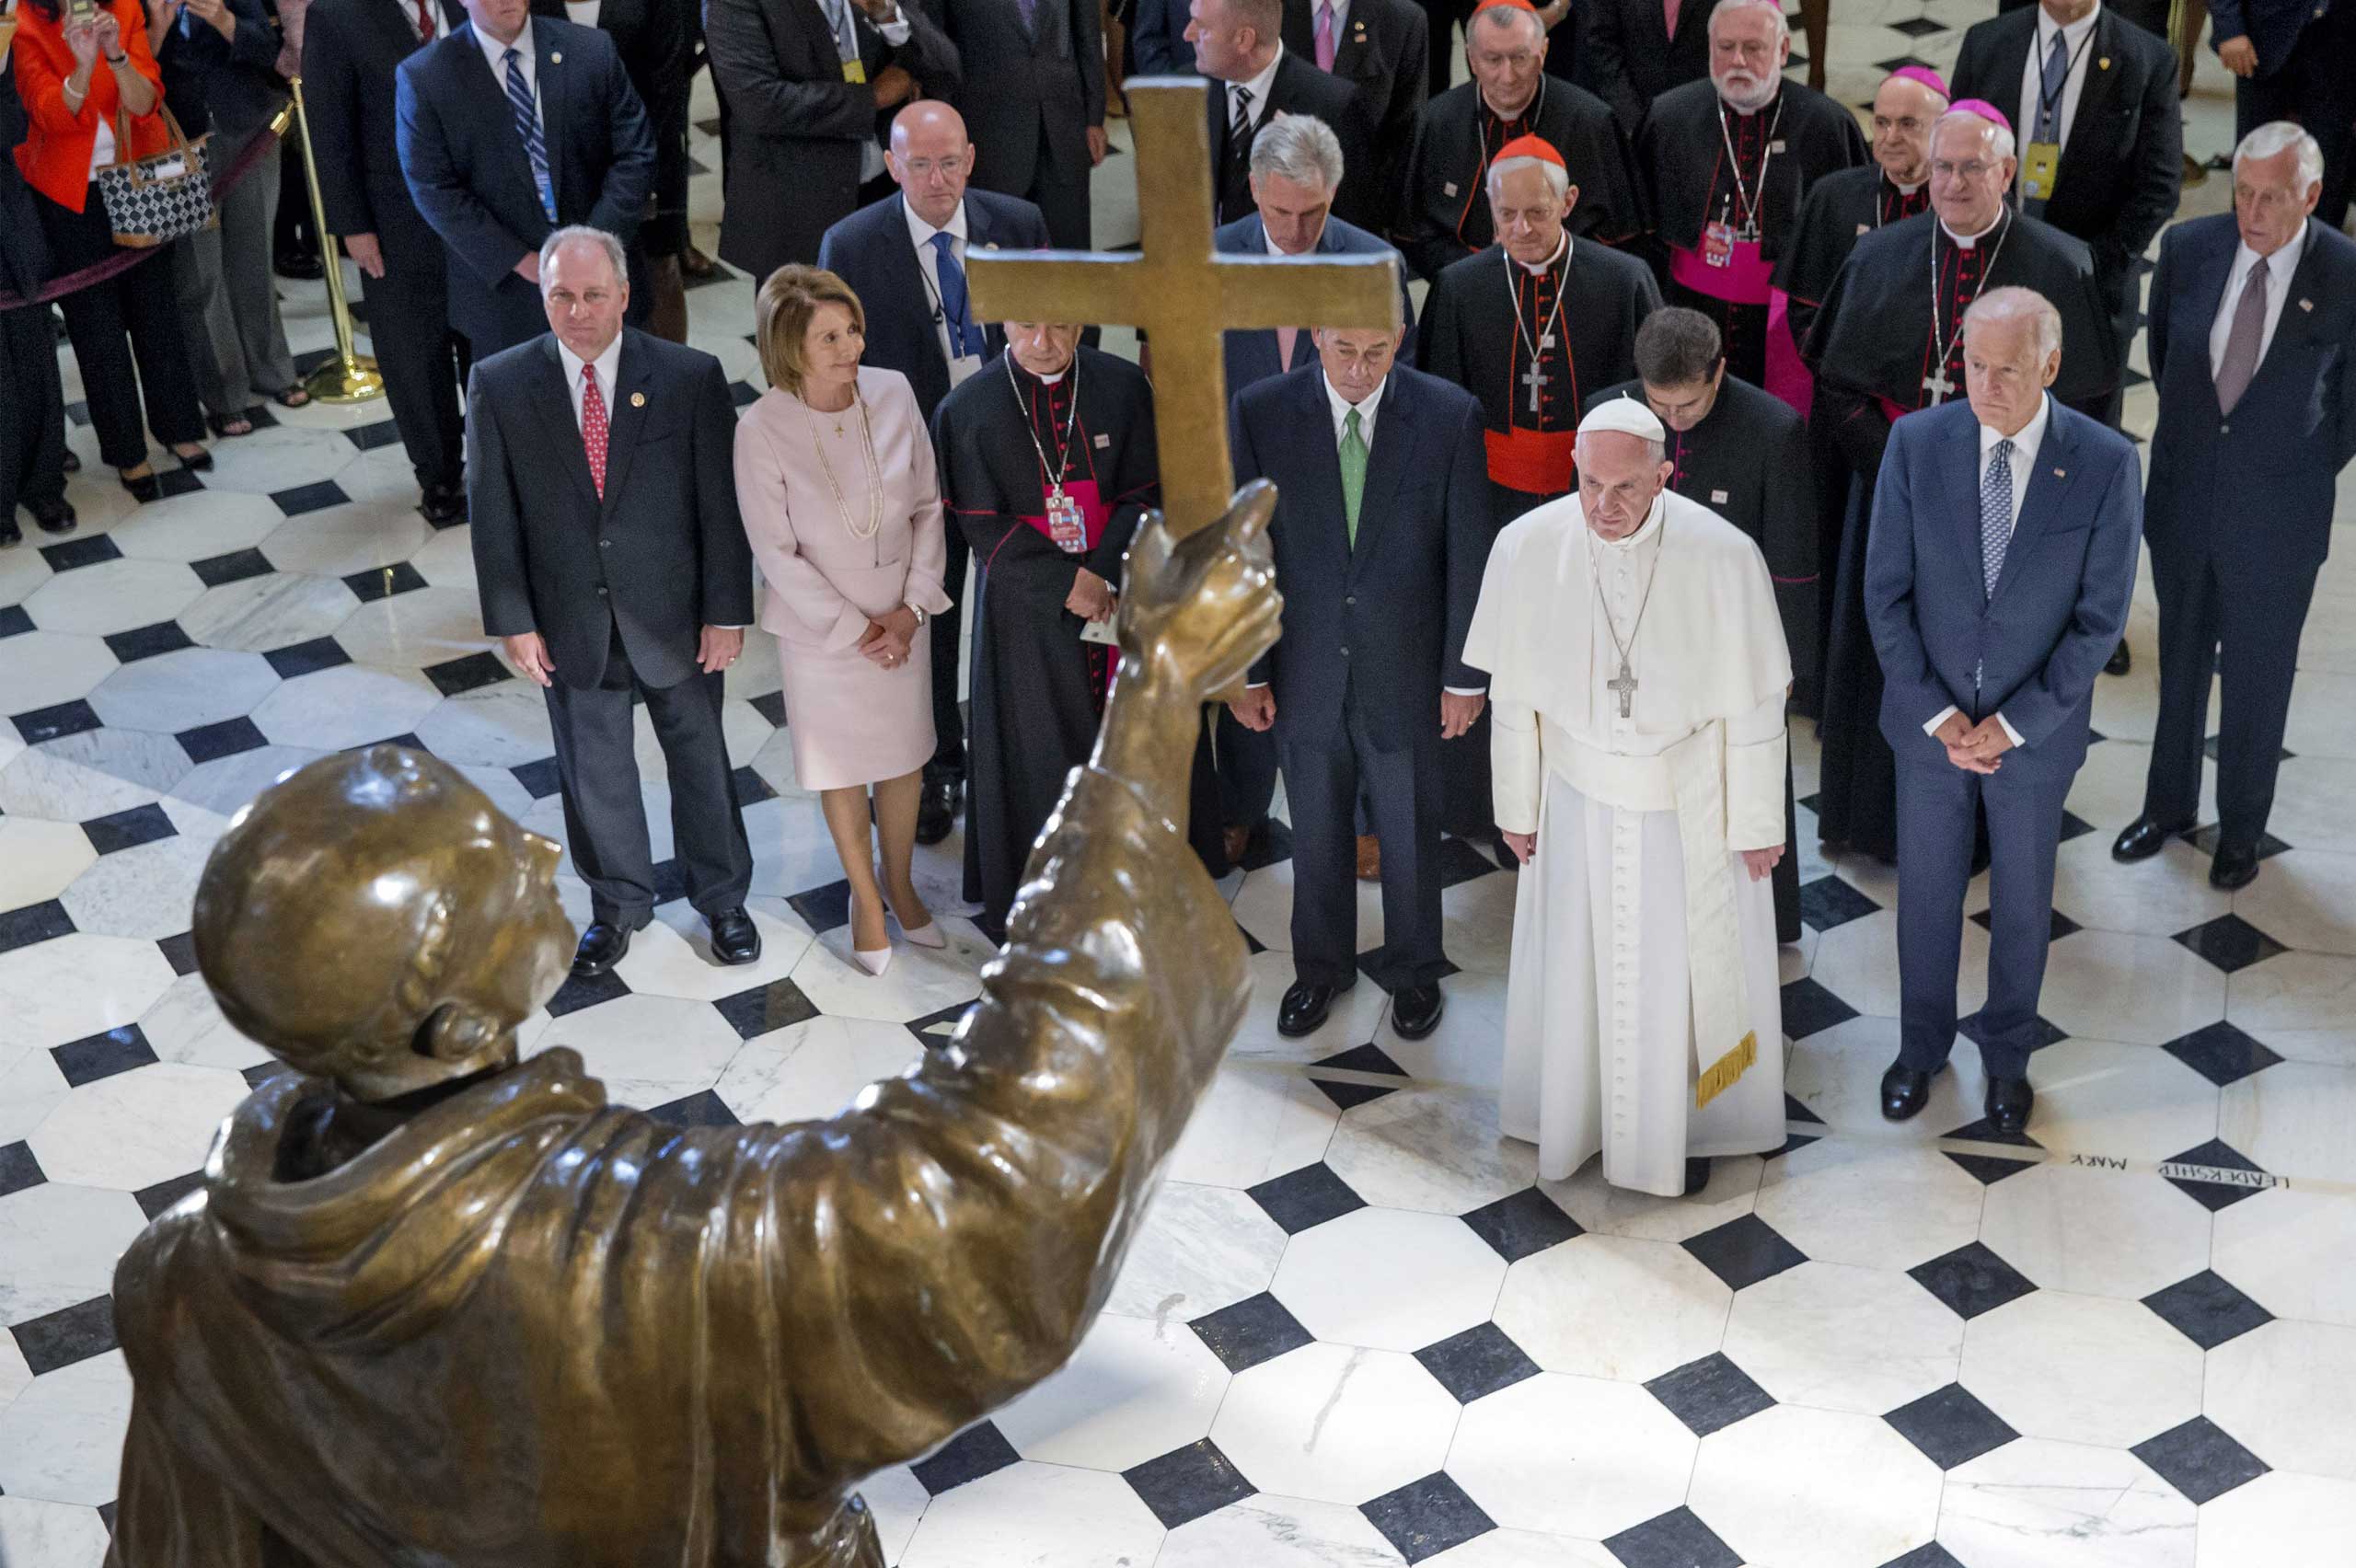 Pope Francis pauses in front of a sculpture of Spanish-born Junipero Serra, the Franciscan Friar known for starting missions in California, in Statuary Hall at the U.S. Capitol in Washington, on Sept. 24, 2015